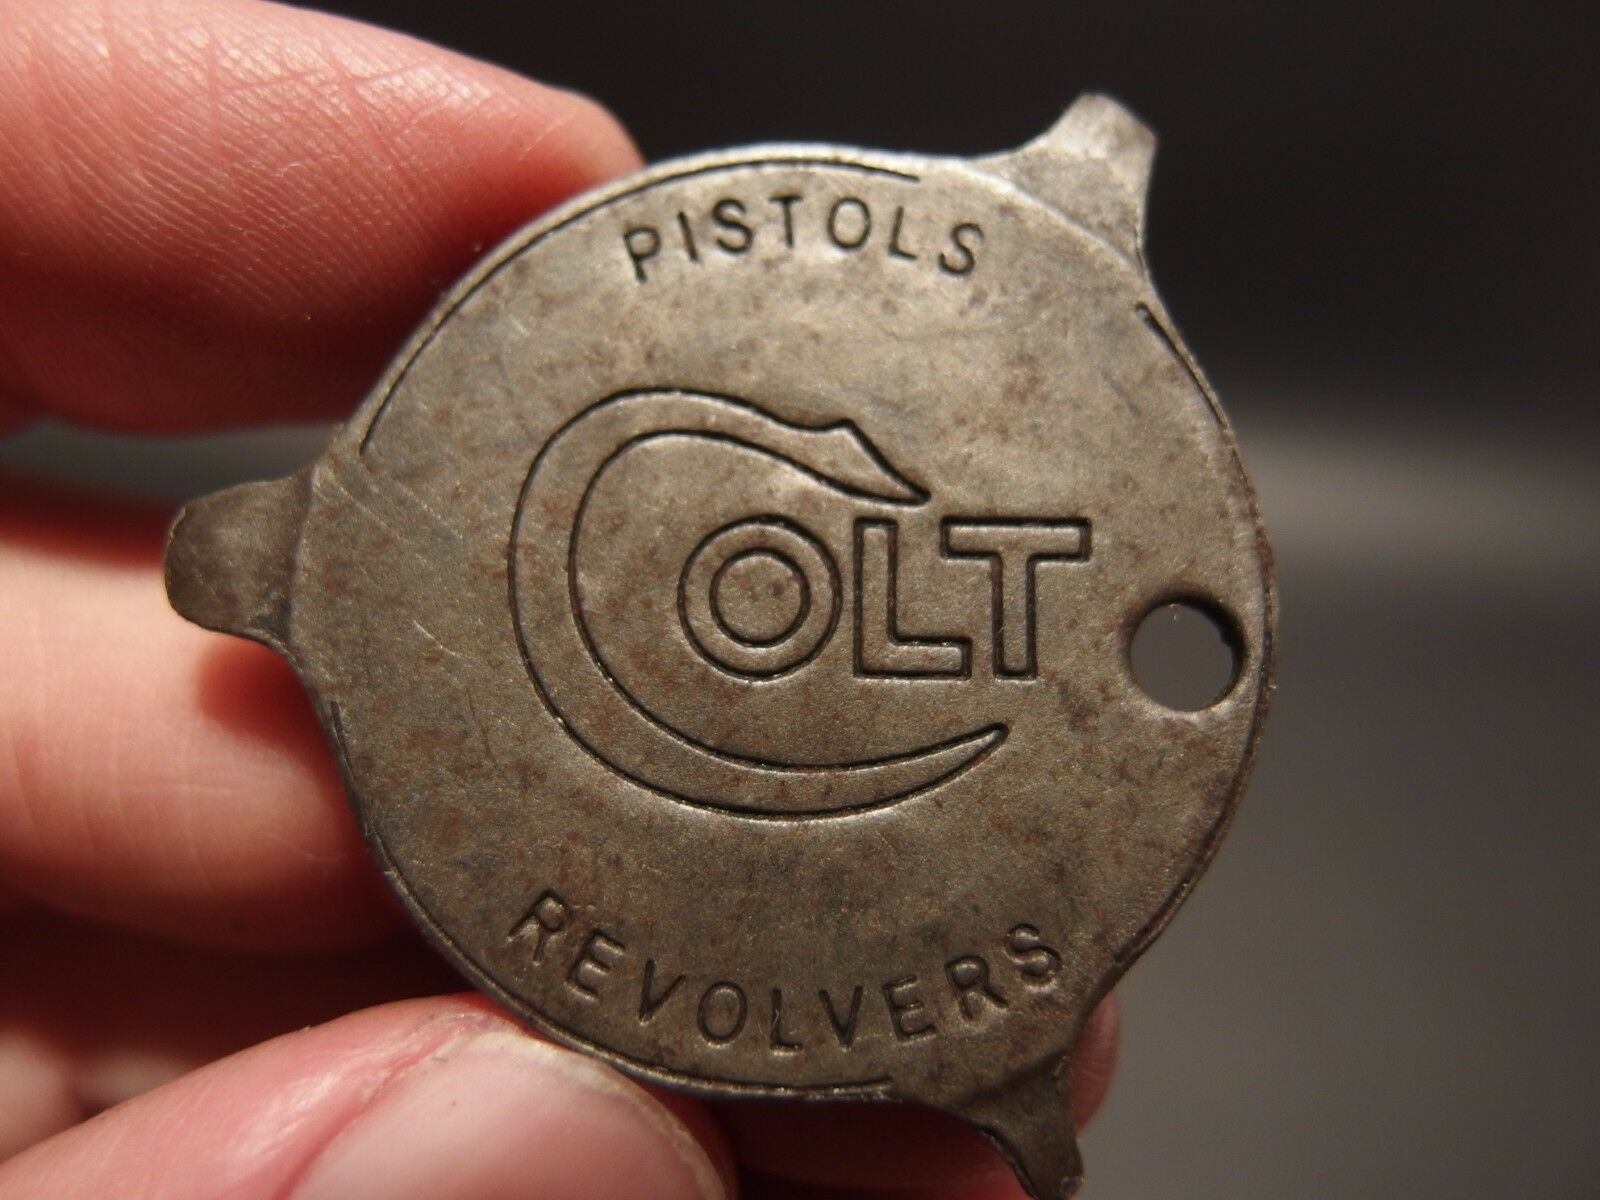 Antique Vintage Style Colt Firearms Screw Driver Key chain - Early Home Decor